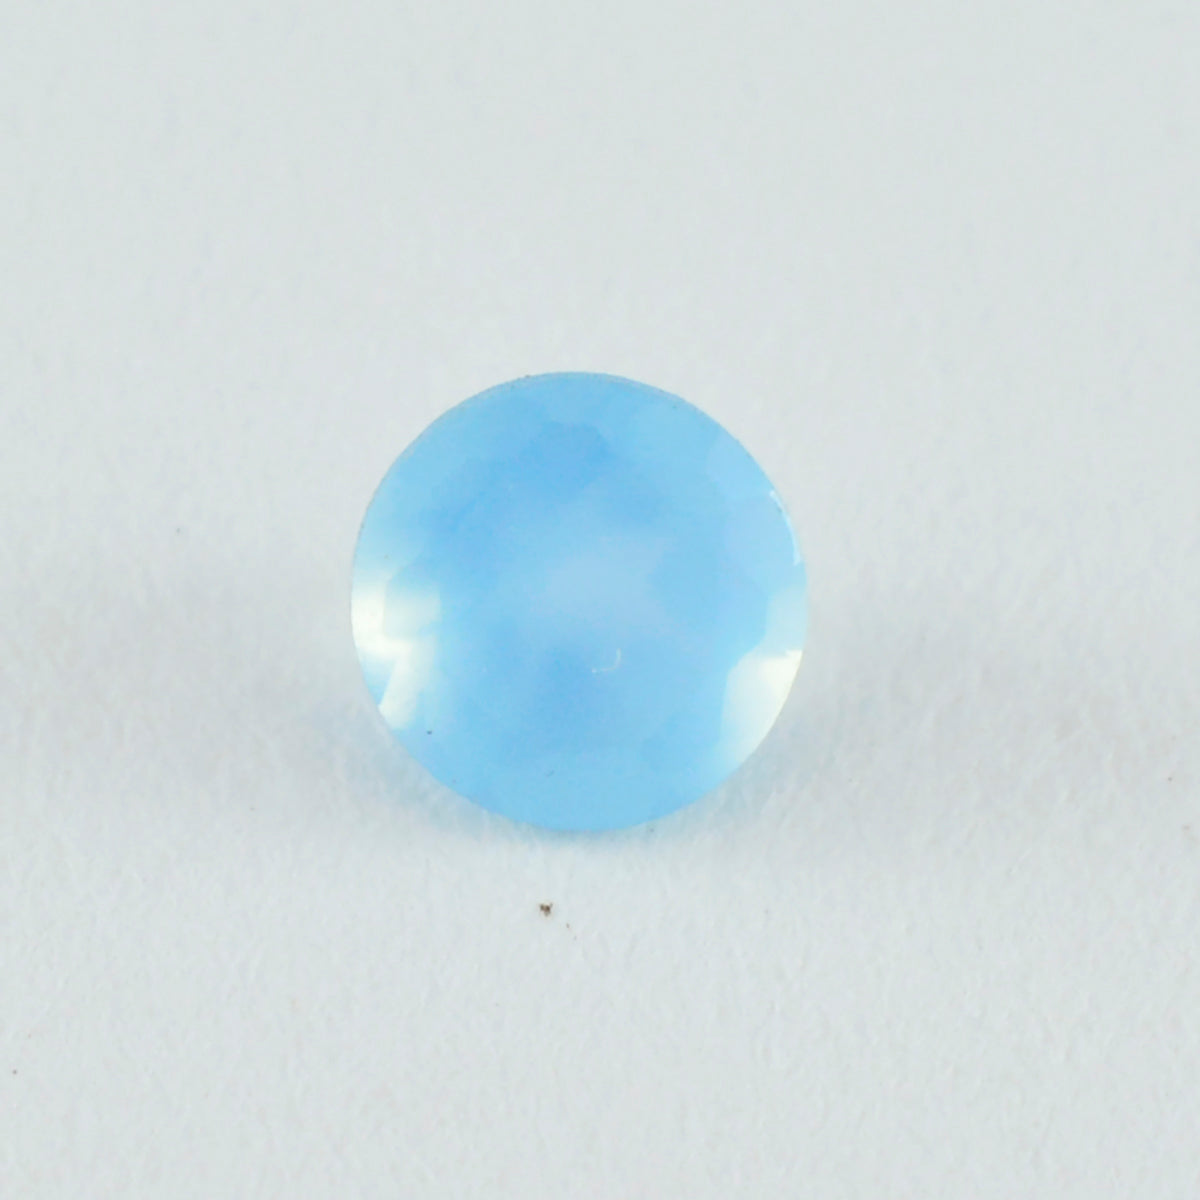 Riyogems 1PC Natural Blue Chalcedony Faceted 9x9 mm Round Shape awesome Quality Loose Gem